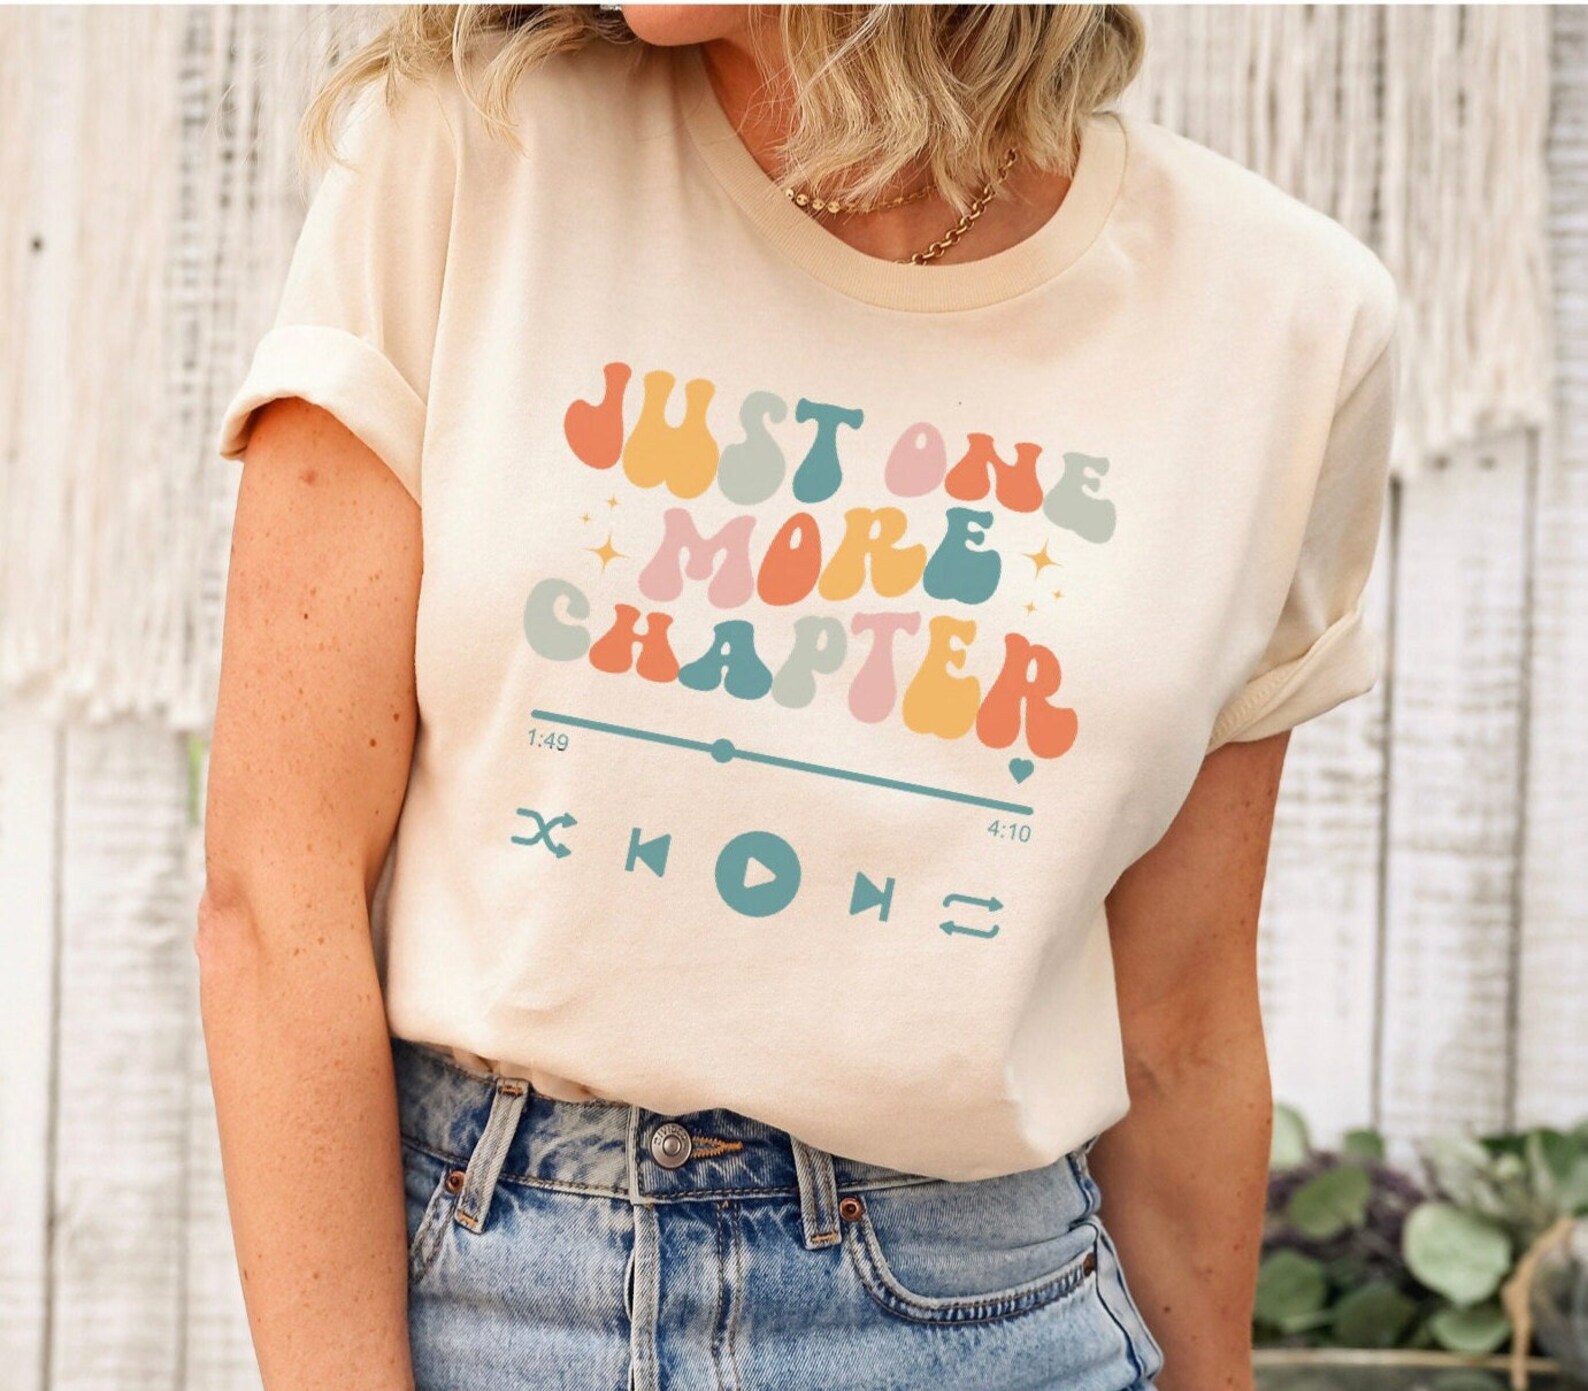 a photo of a t-shirt that says, "Just one more chapter." An illustration of a play bar are under the words.